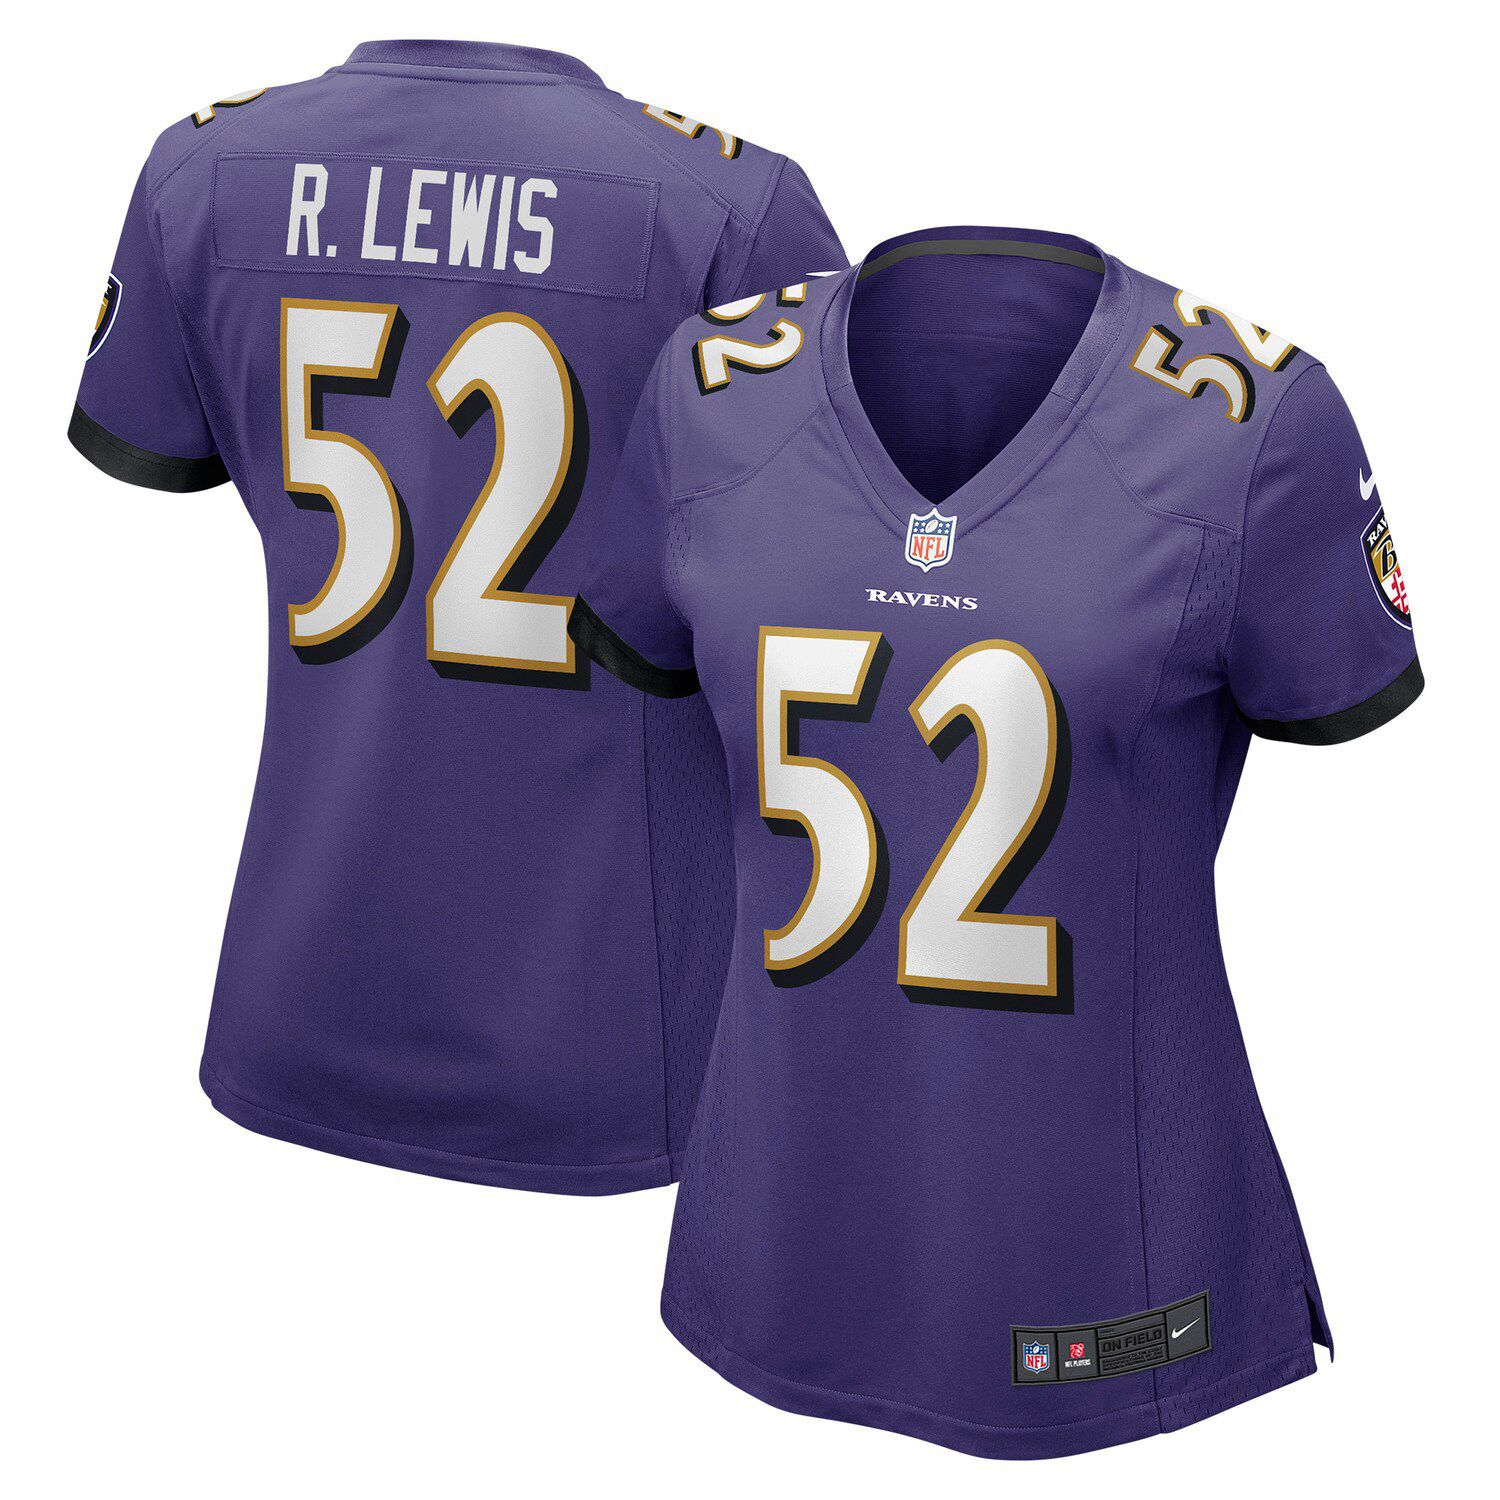 buy ray lewis jersey